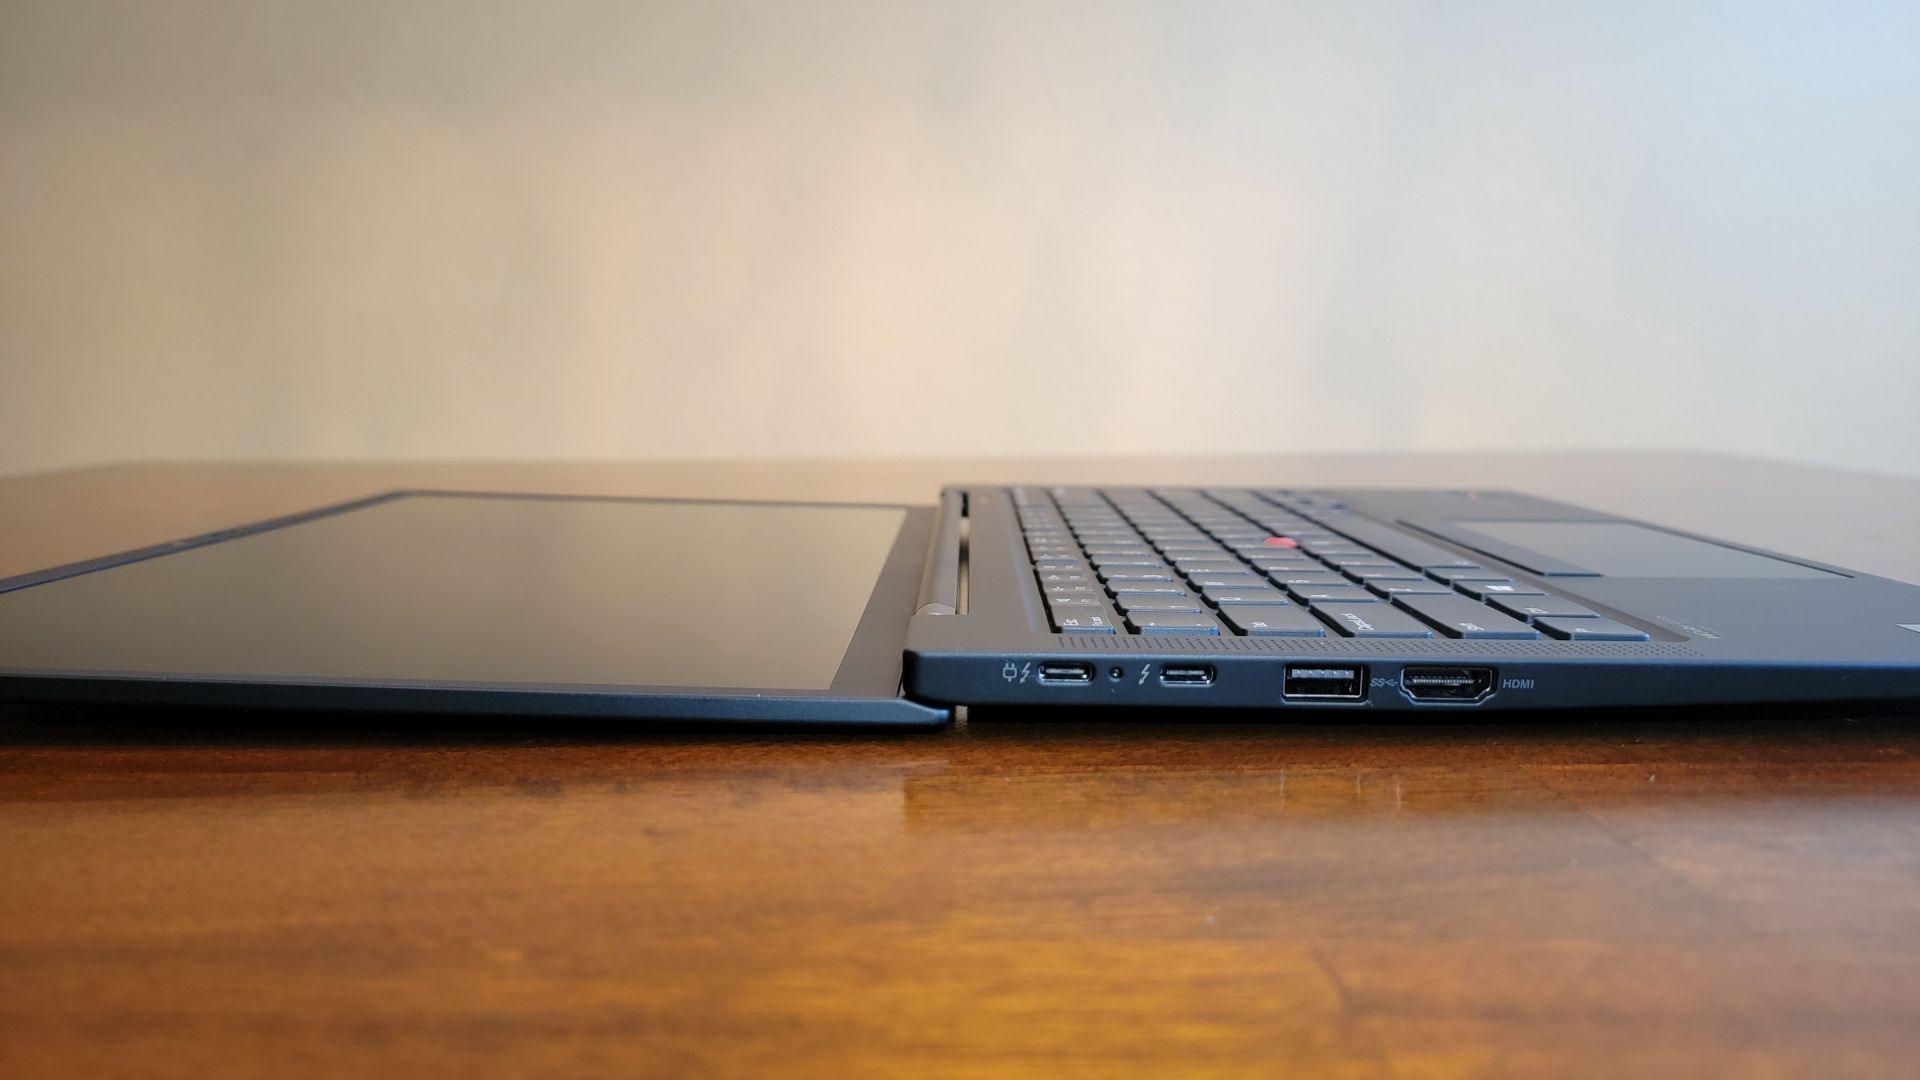 closeup of the available ports on the lenovo thinkpad x1 carbon gen 9 laptop, including two usb-c ports, one usb-a port, and an hdmi port